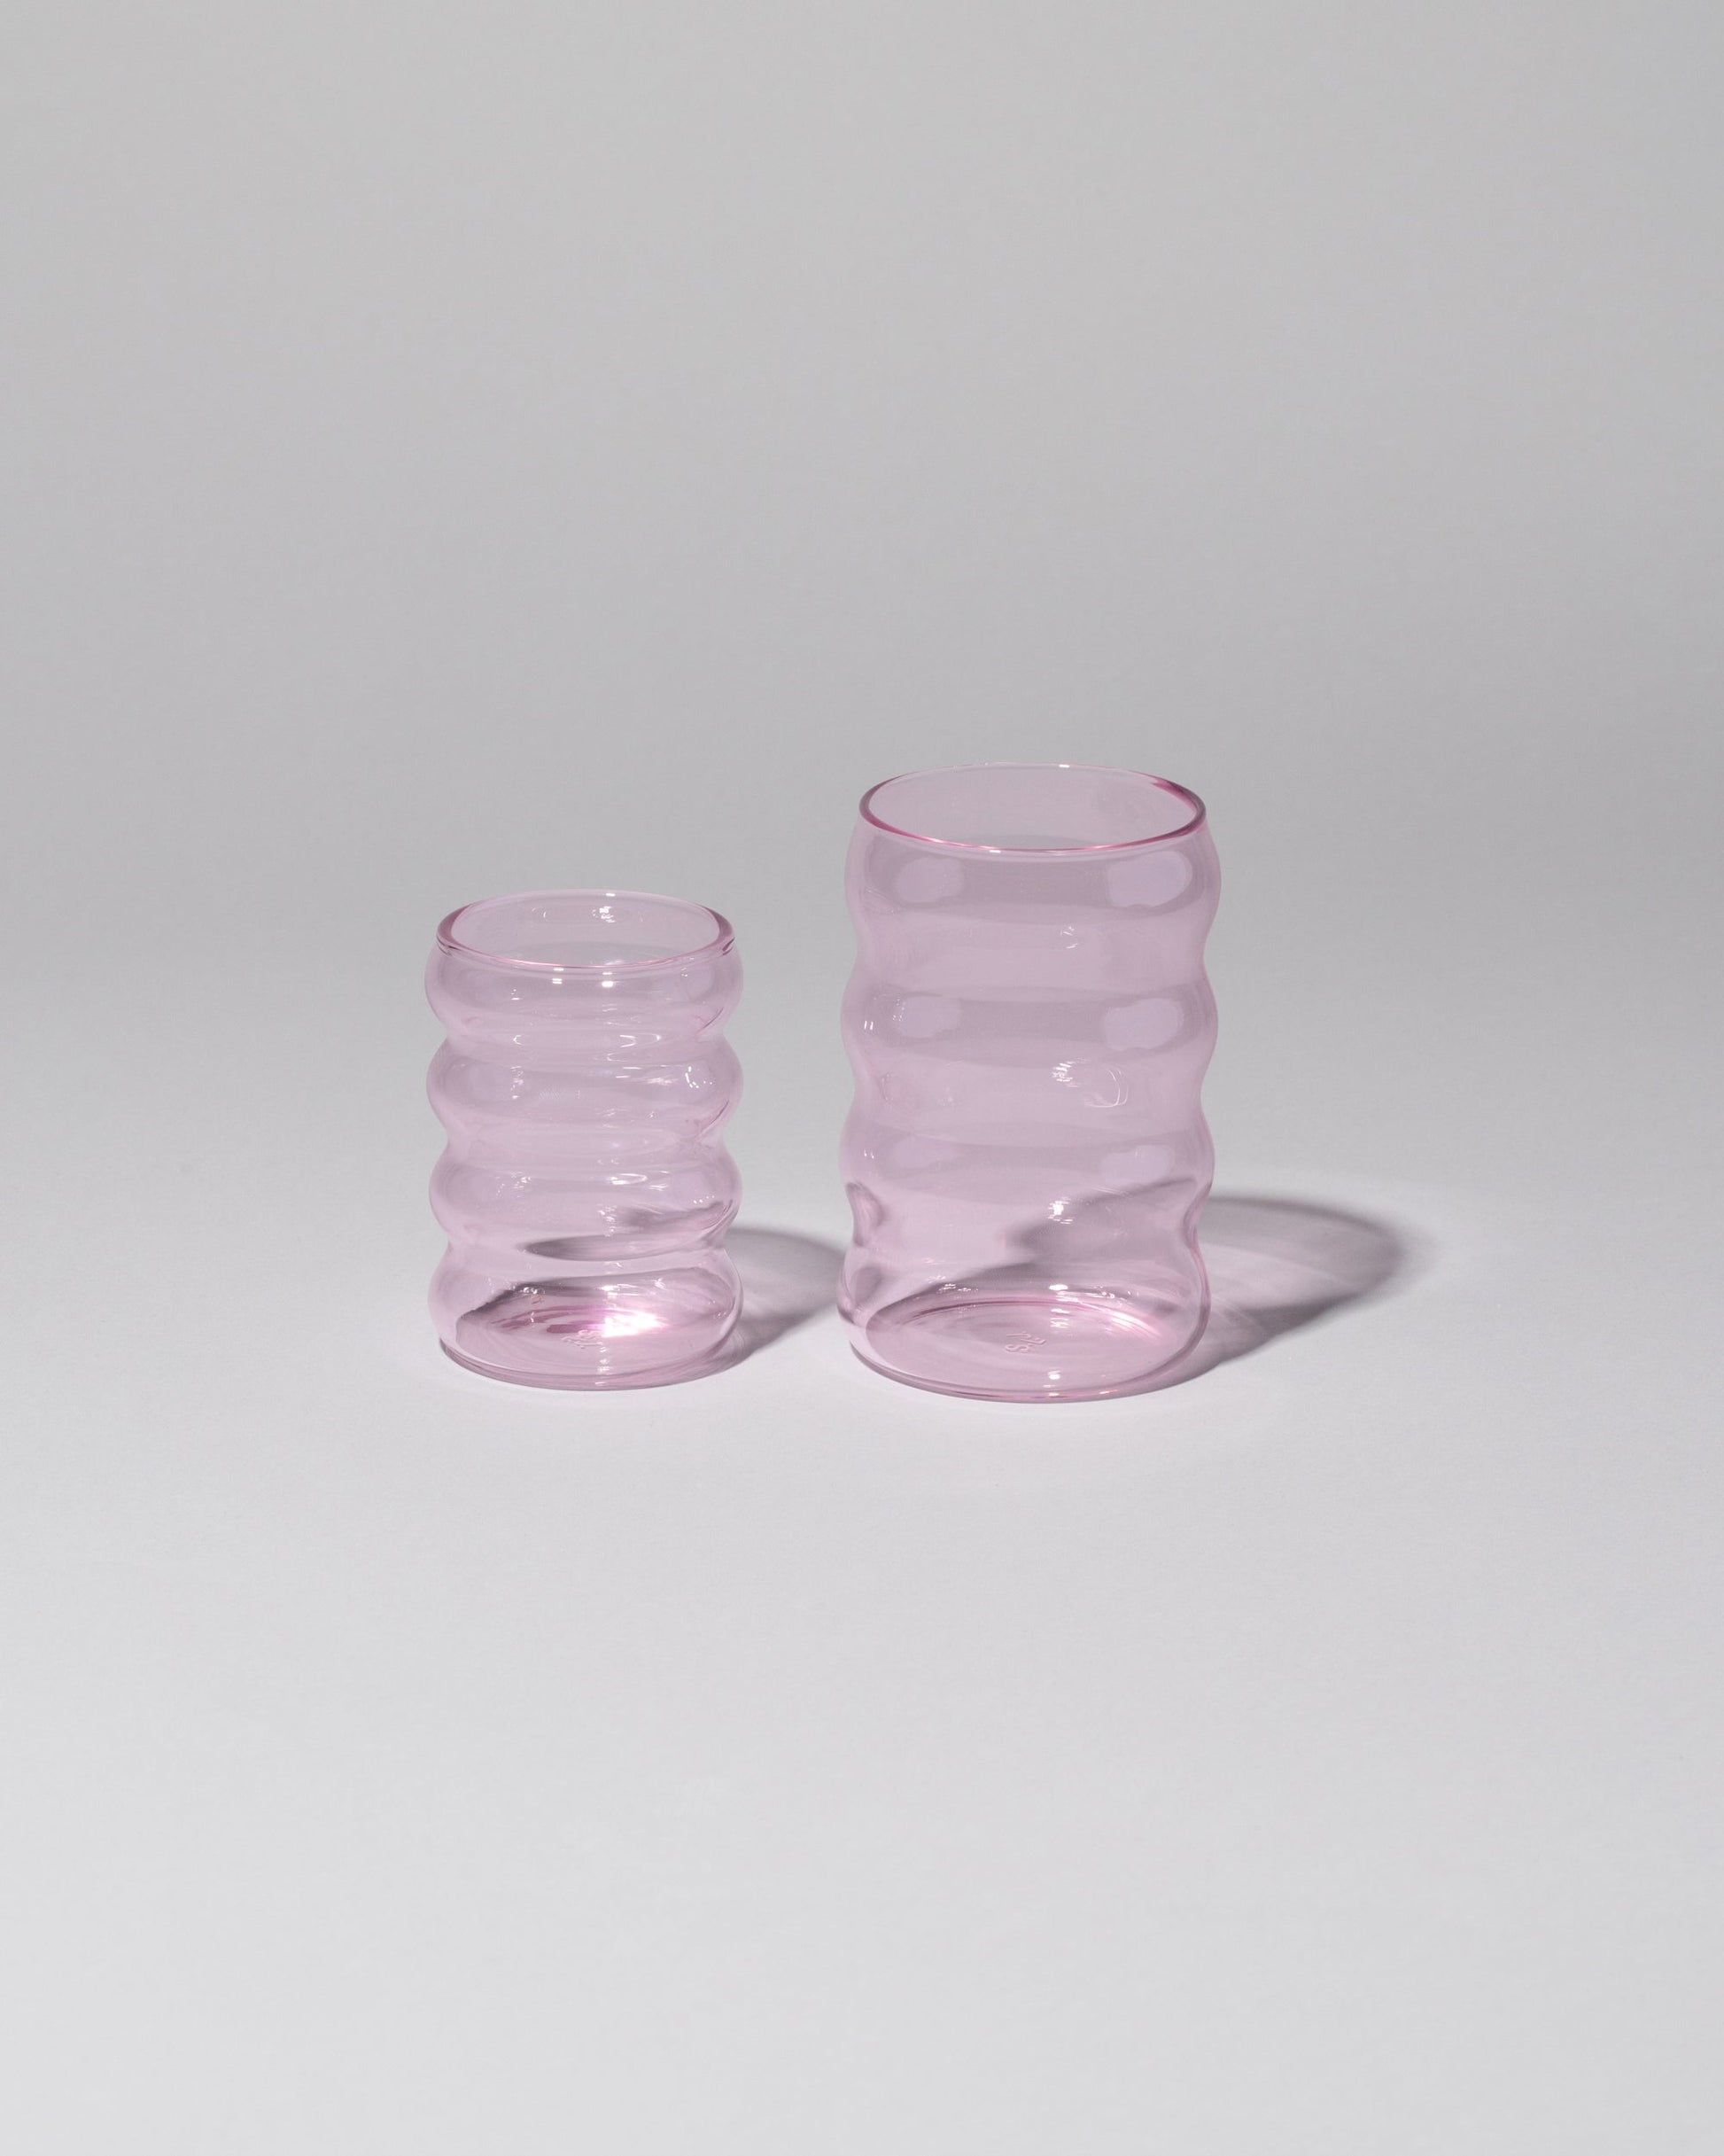  Sophie Lou Jacobsen Small and Large Ripple Cups on light color background.